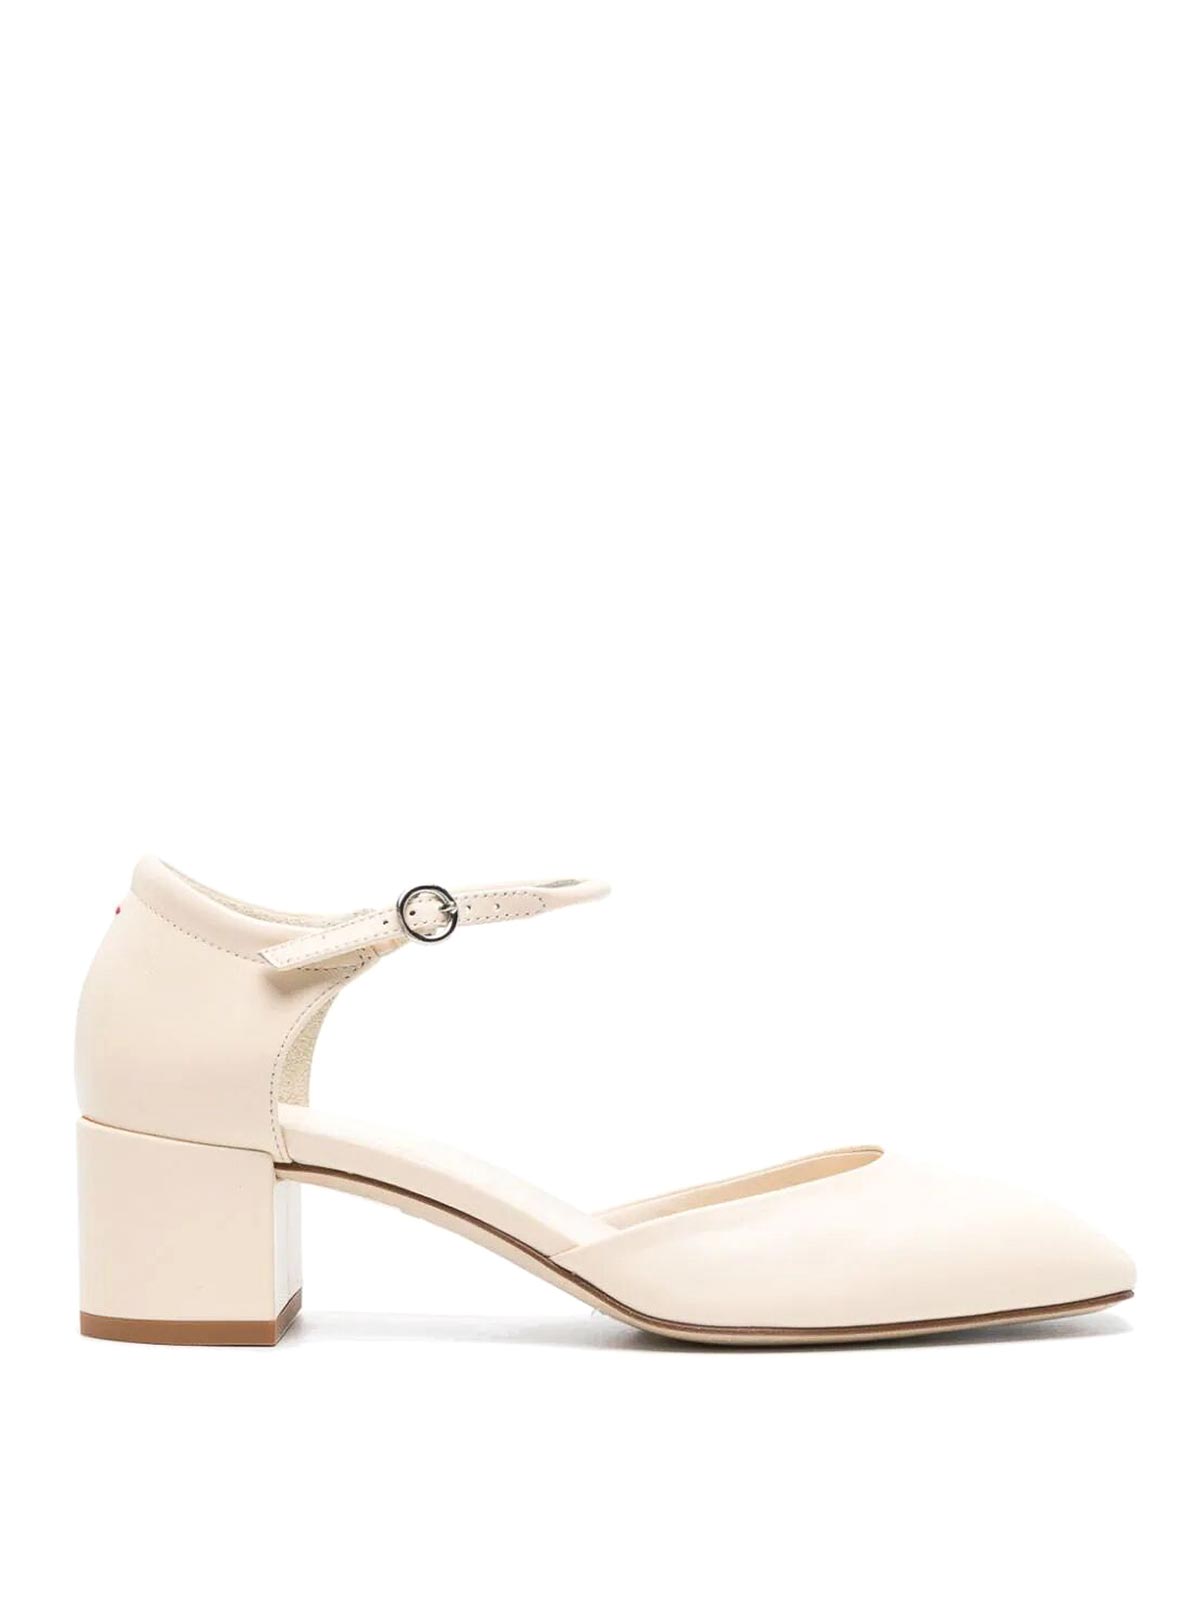 Shop Aeyde Magda Shoes In Nude & Neutrals